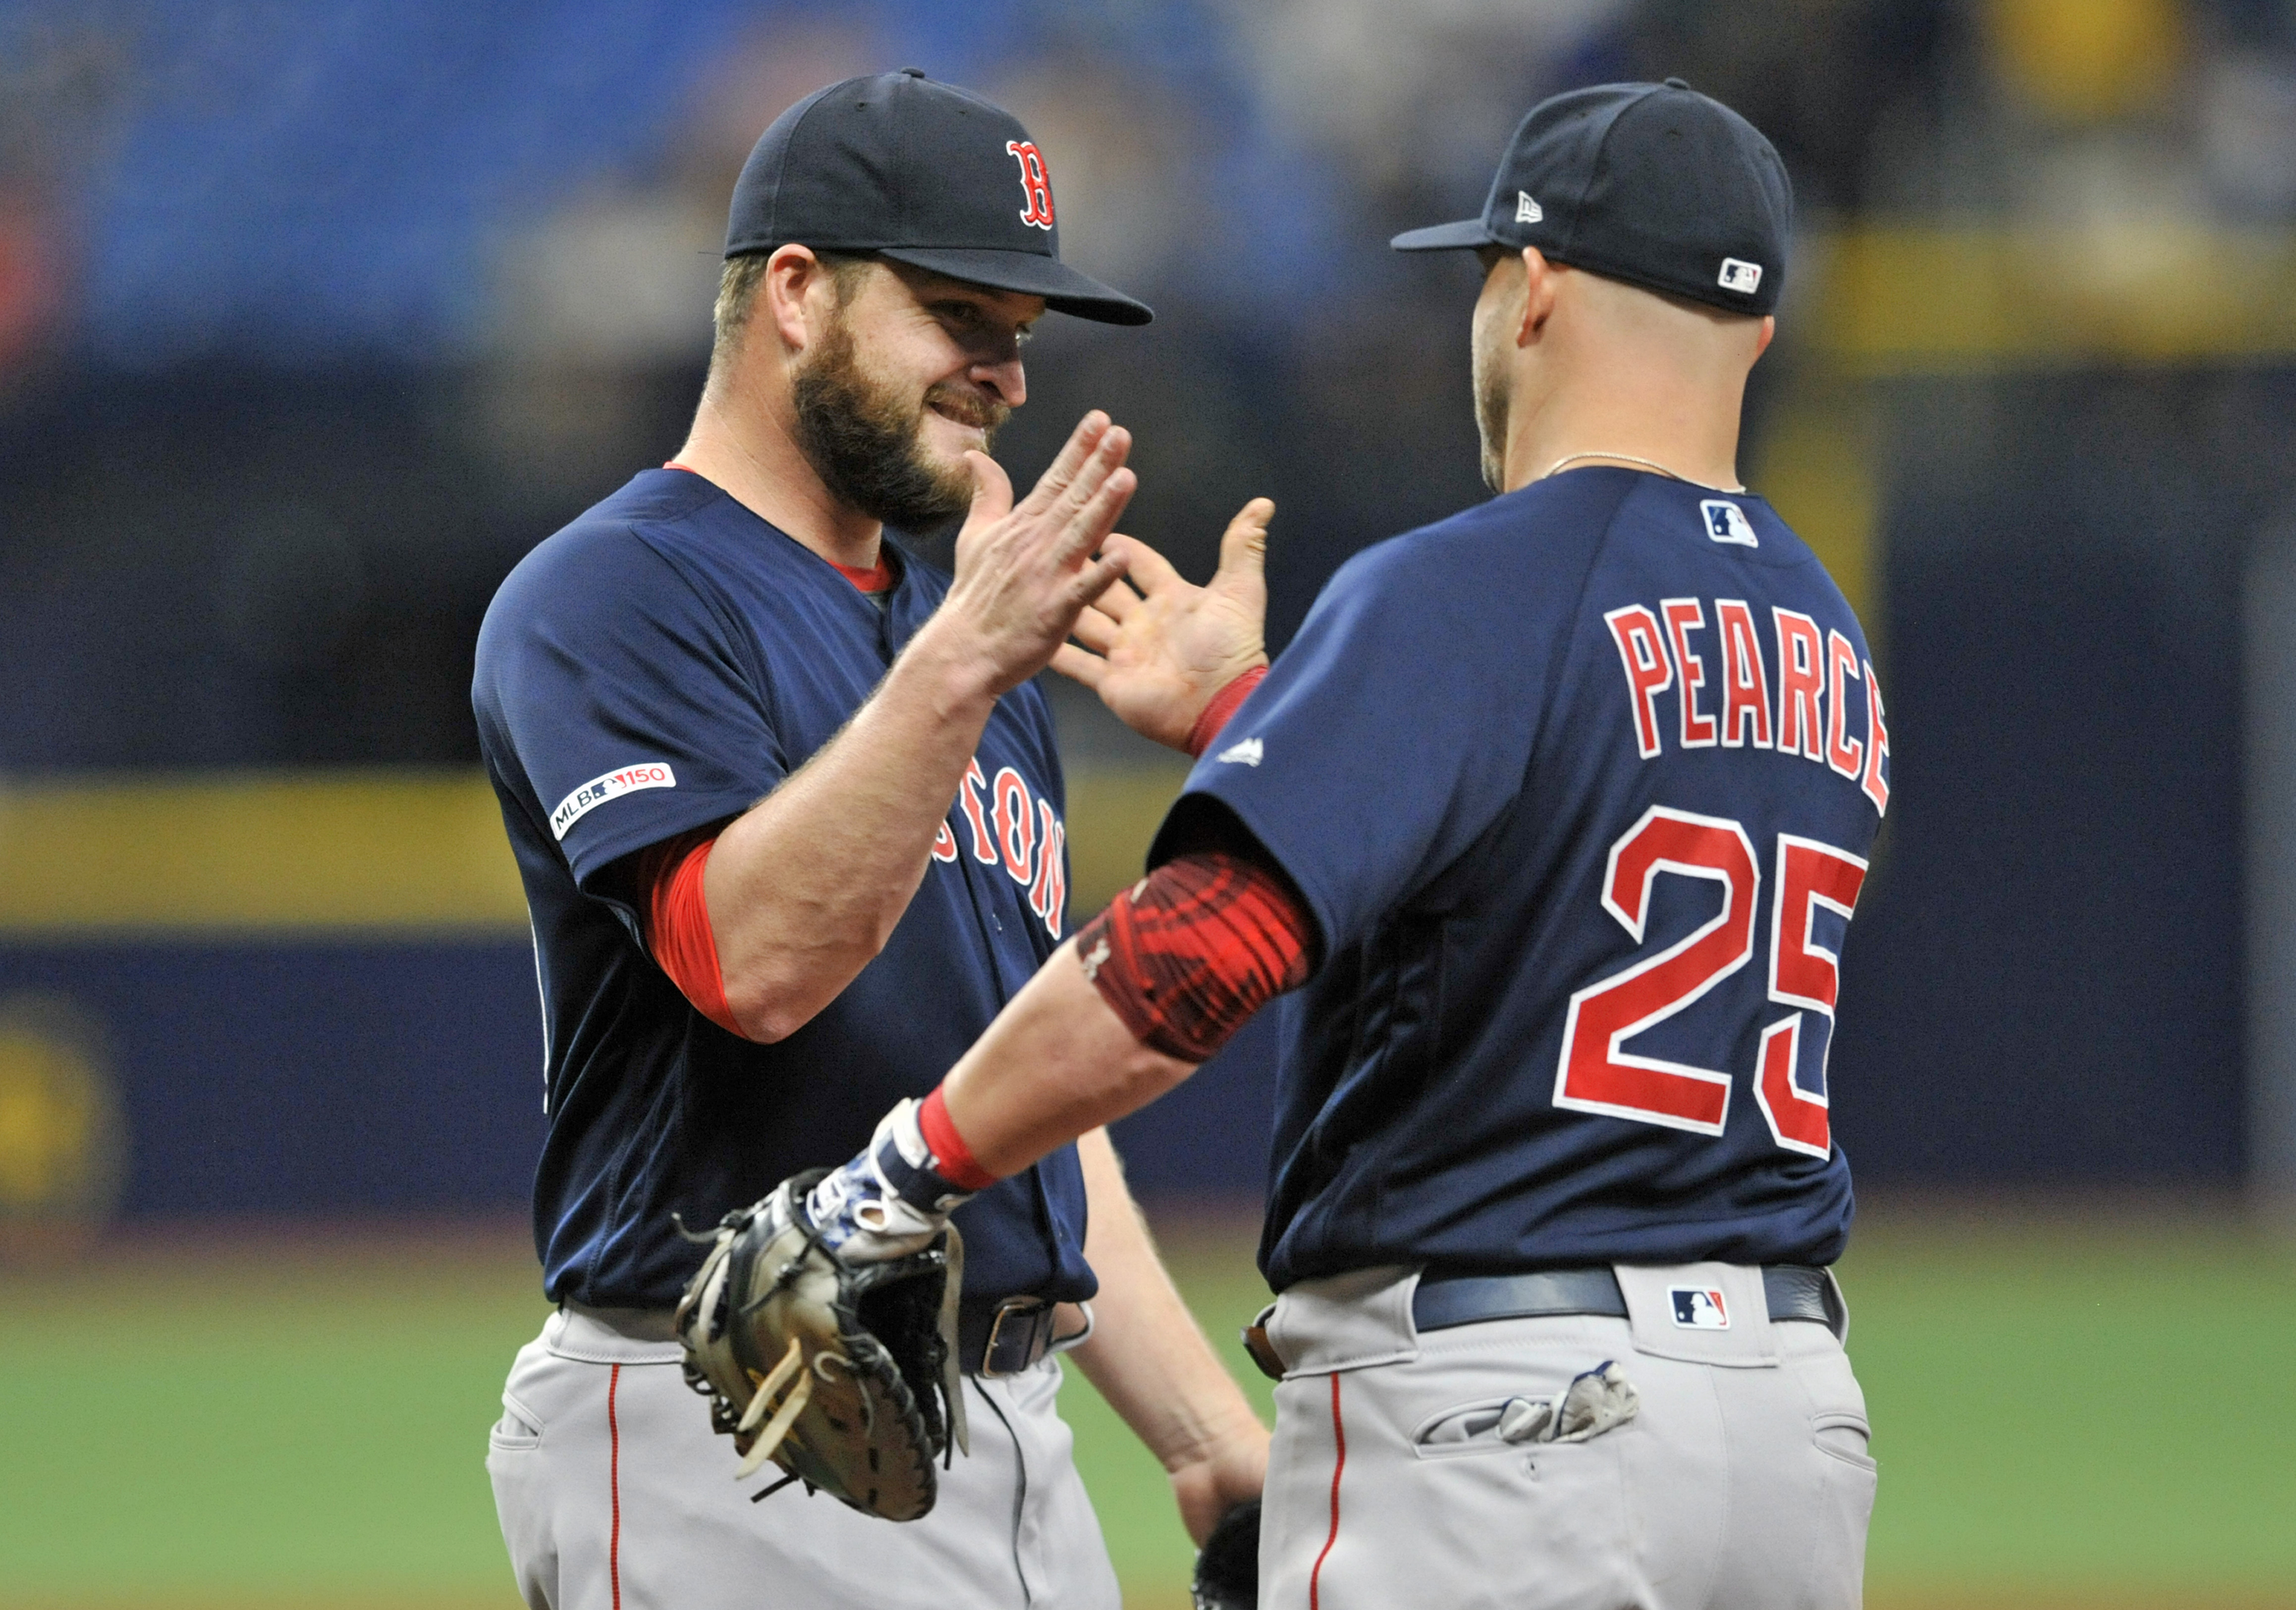 Red Sox complete sweep, close gap on AL East-leading Rays